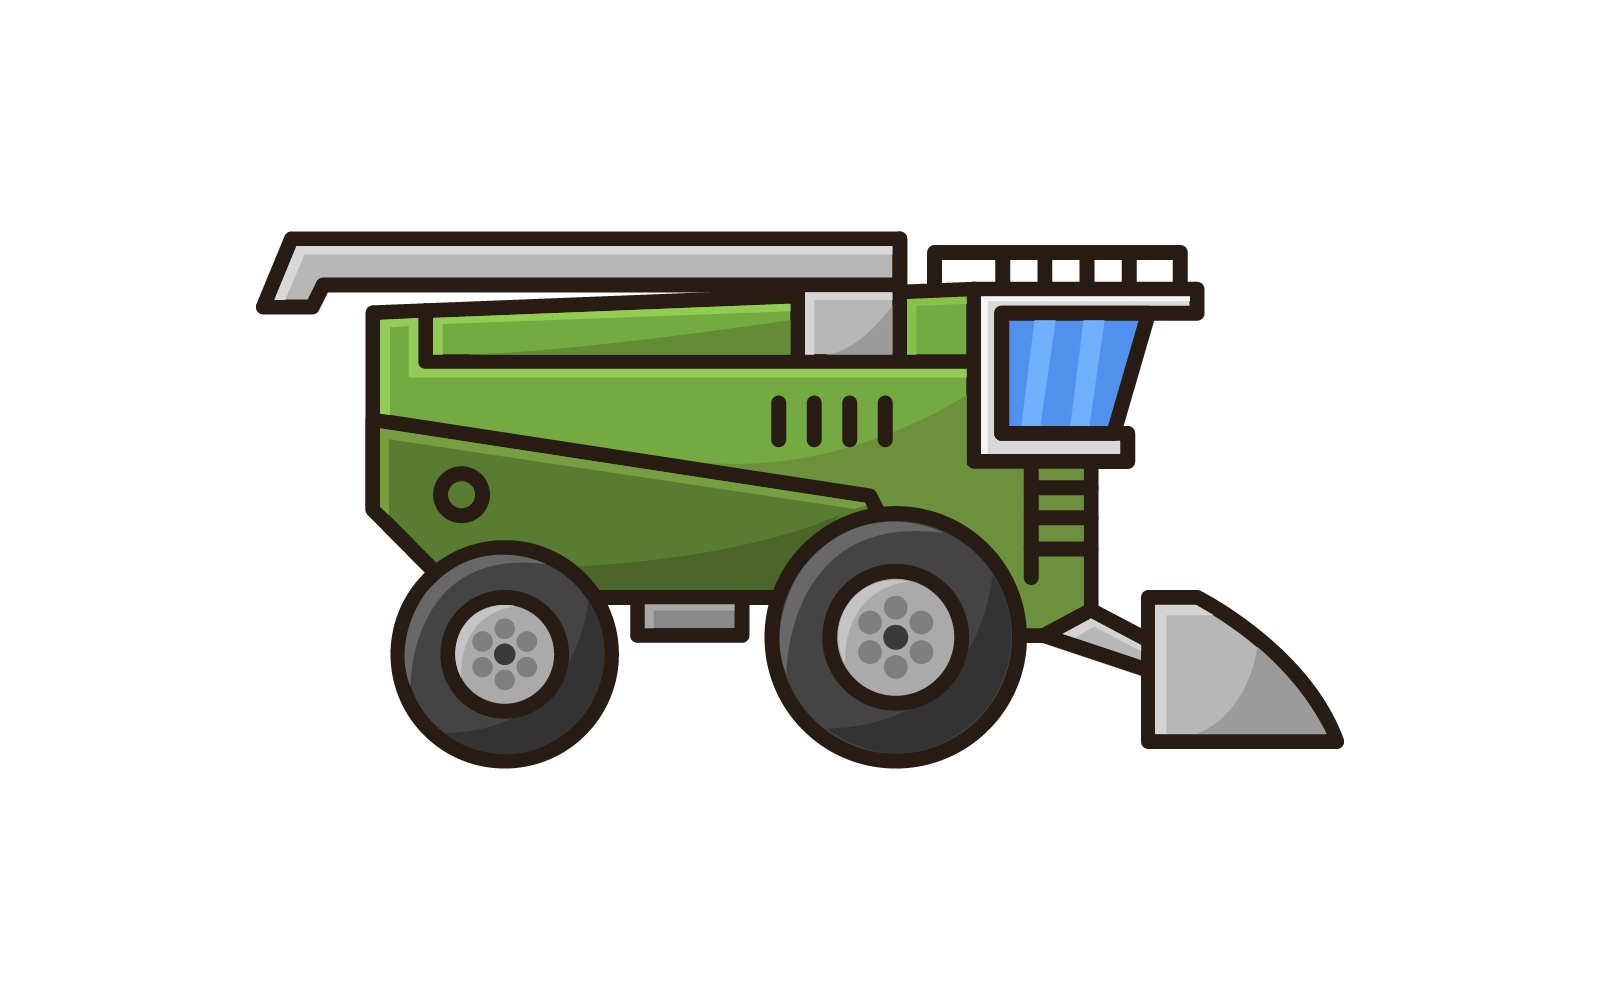 Harvester combine illustrated on a white background